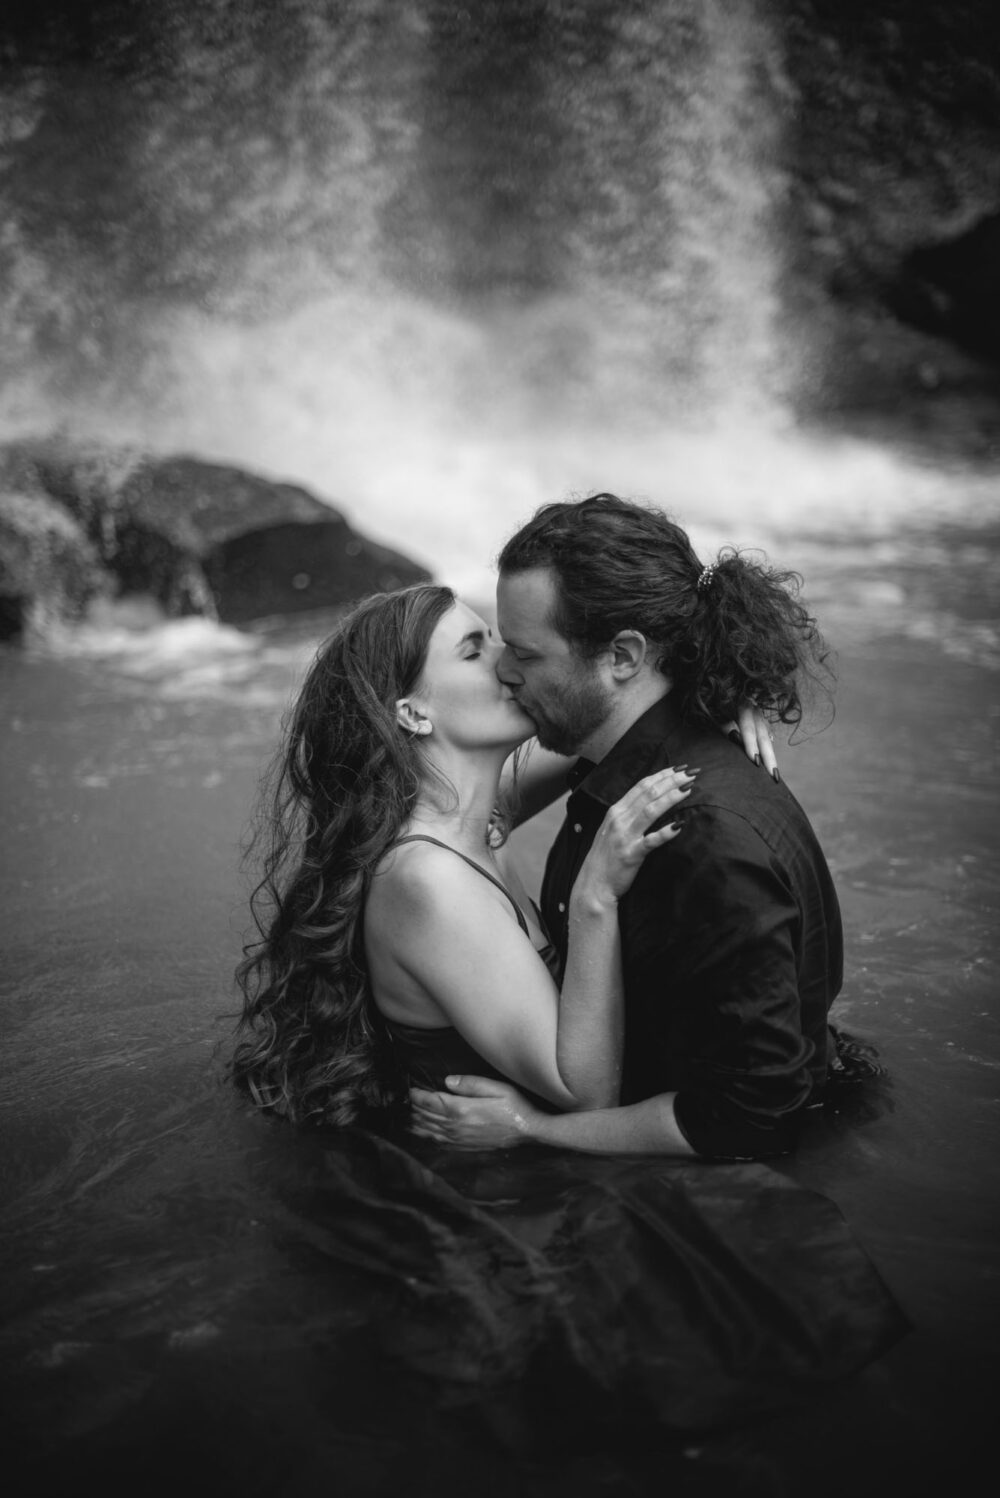 Waterfall Engagement Photography